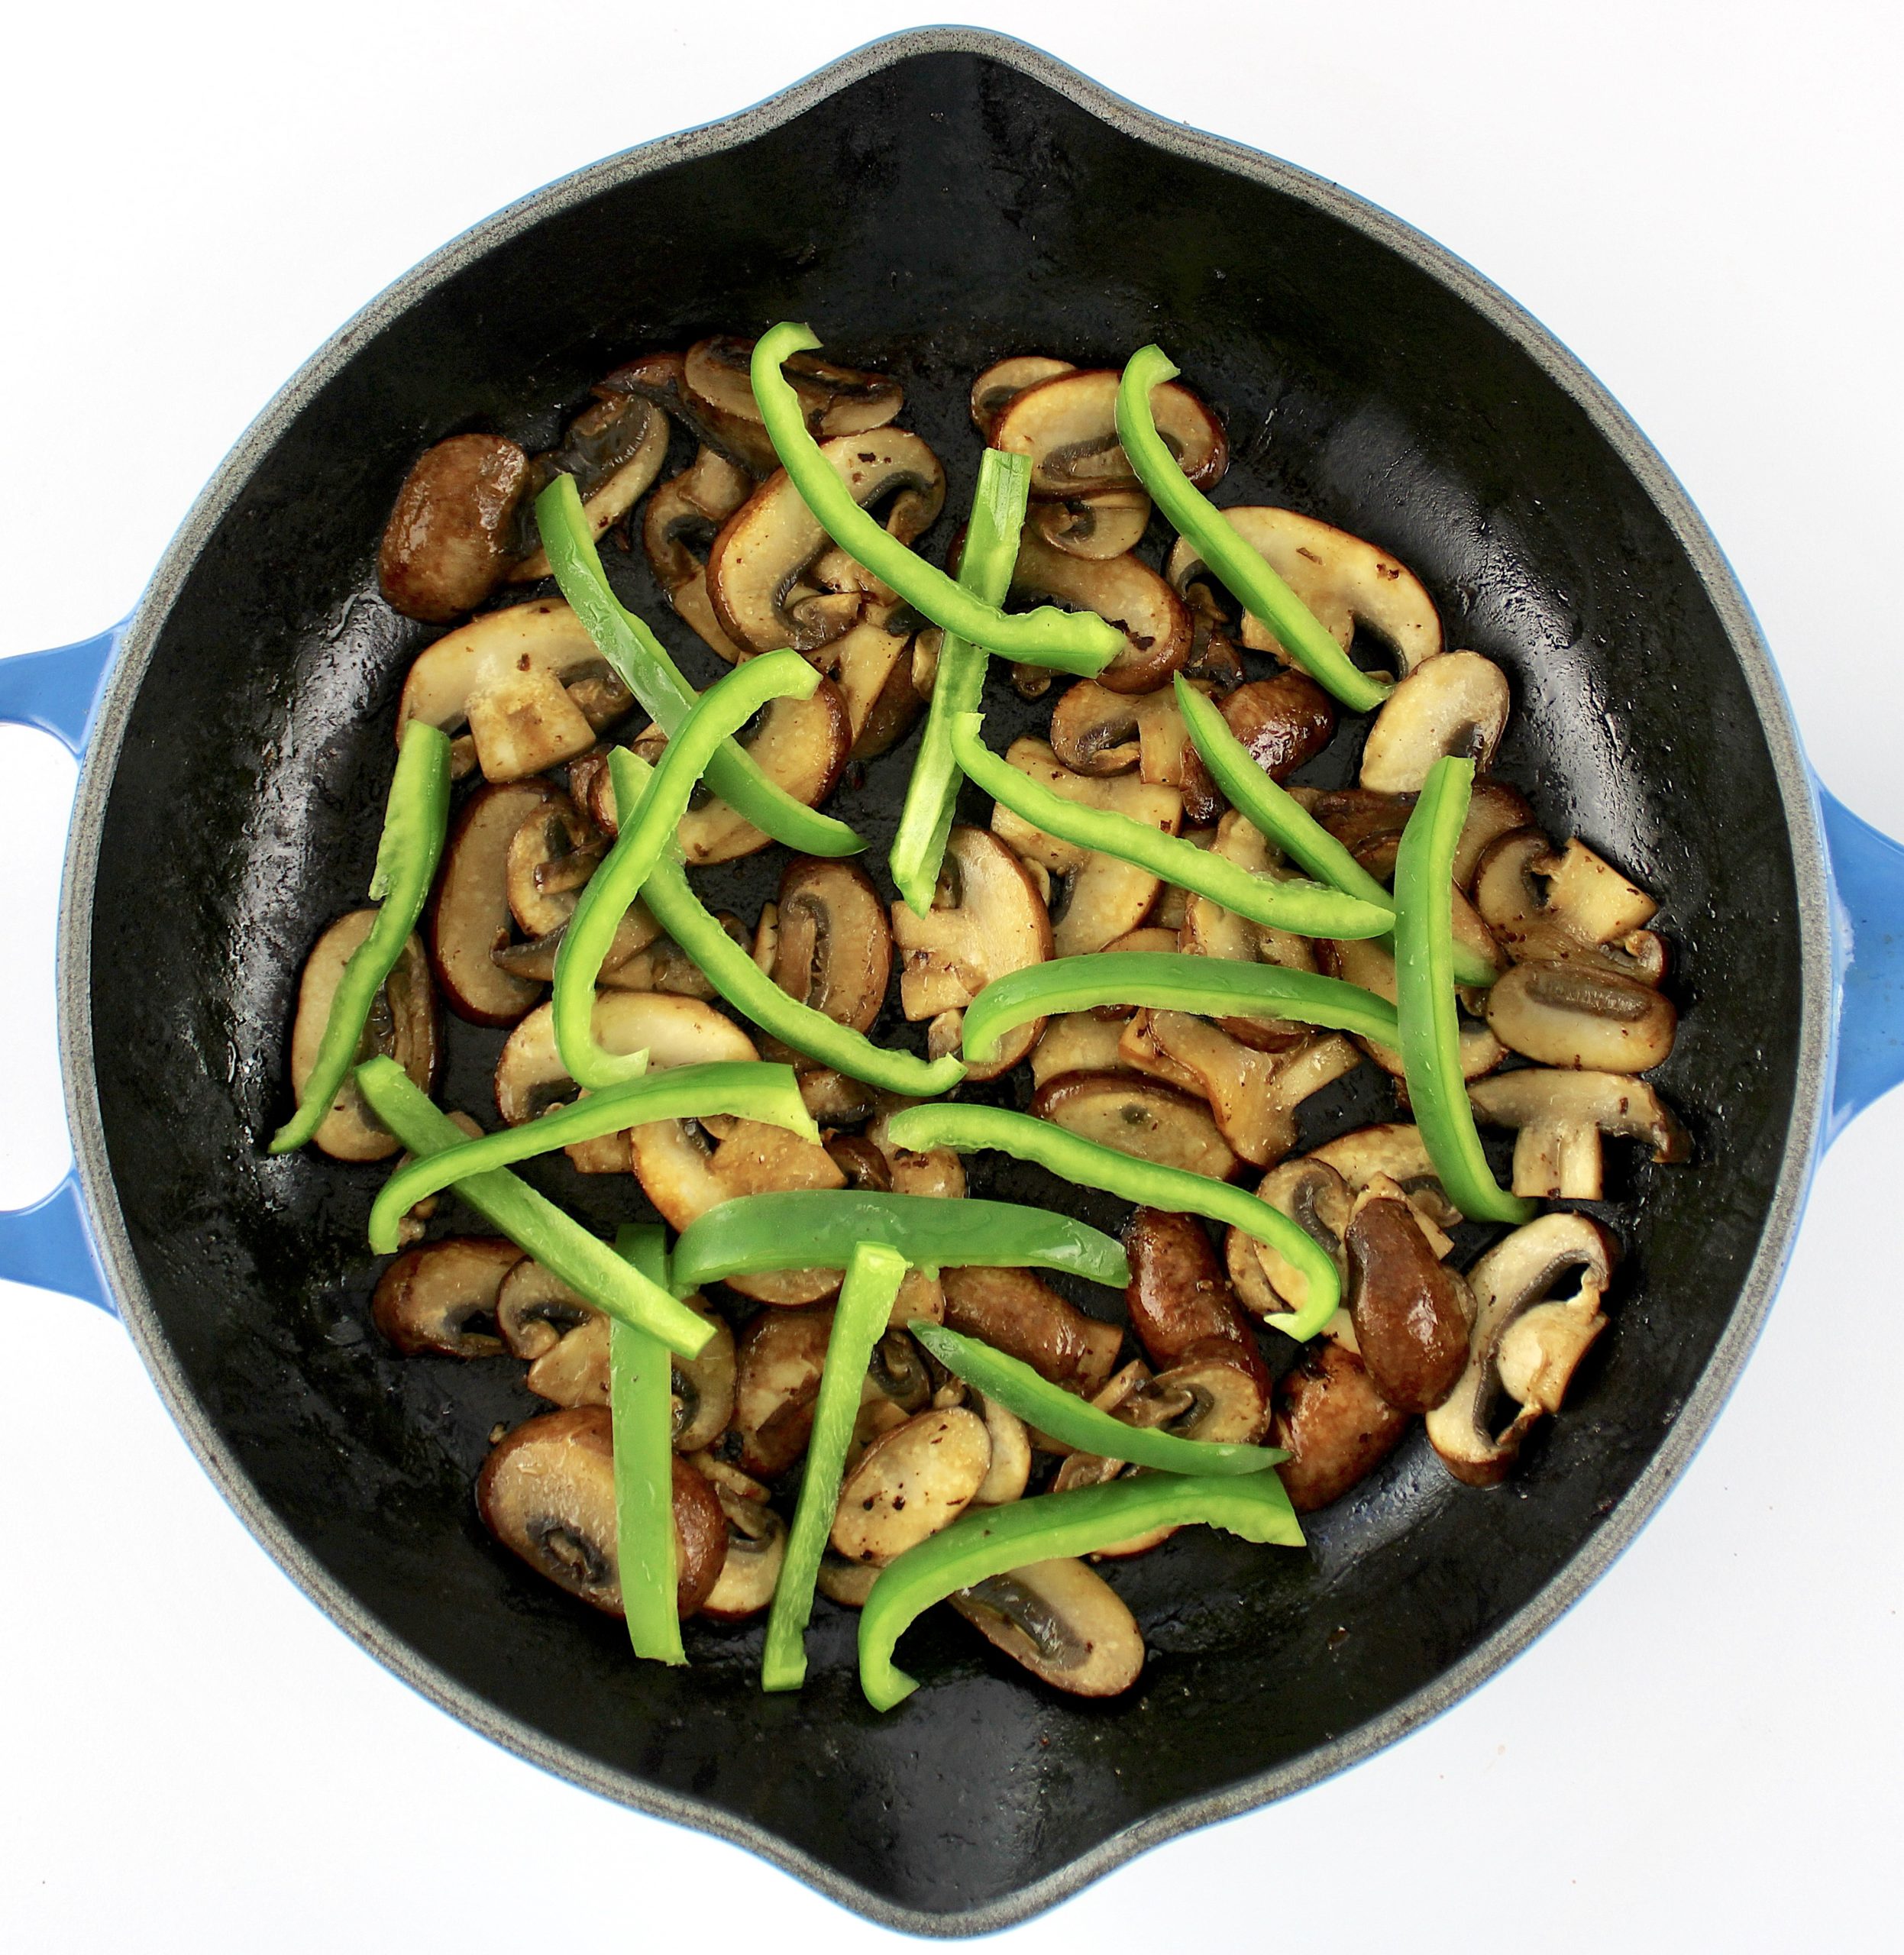 cooked mushroom slices and green bell pepper slices in skillet